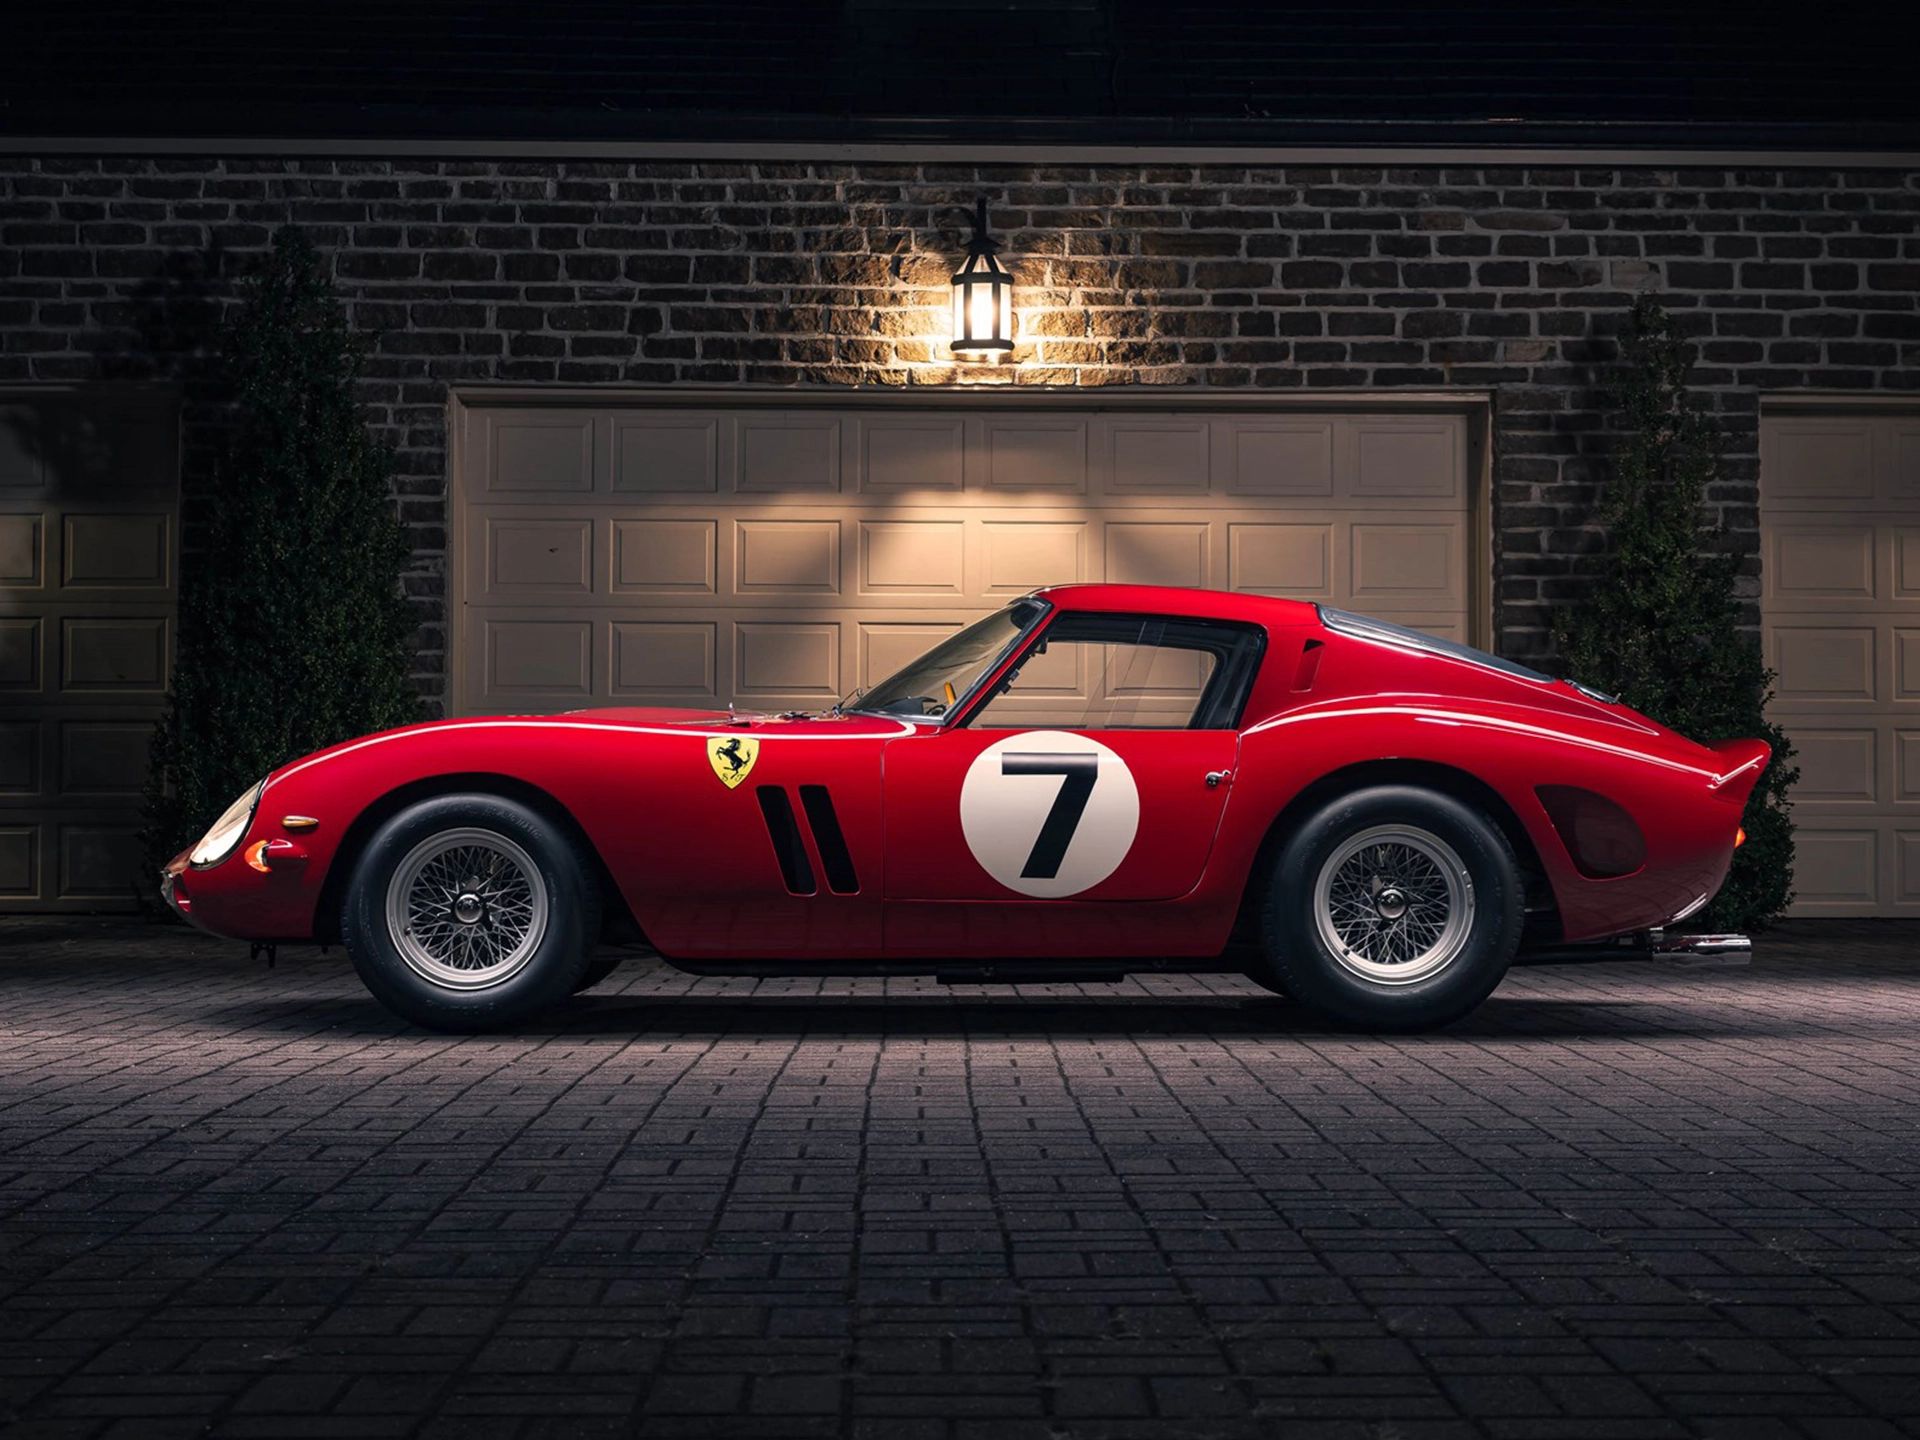 Ferrari 250 GTO in New York. Which way does the scale tip? - 2